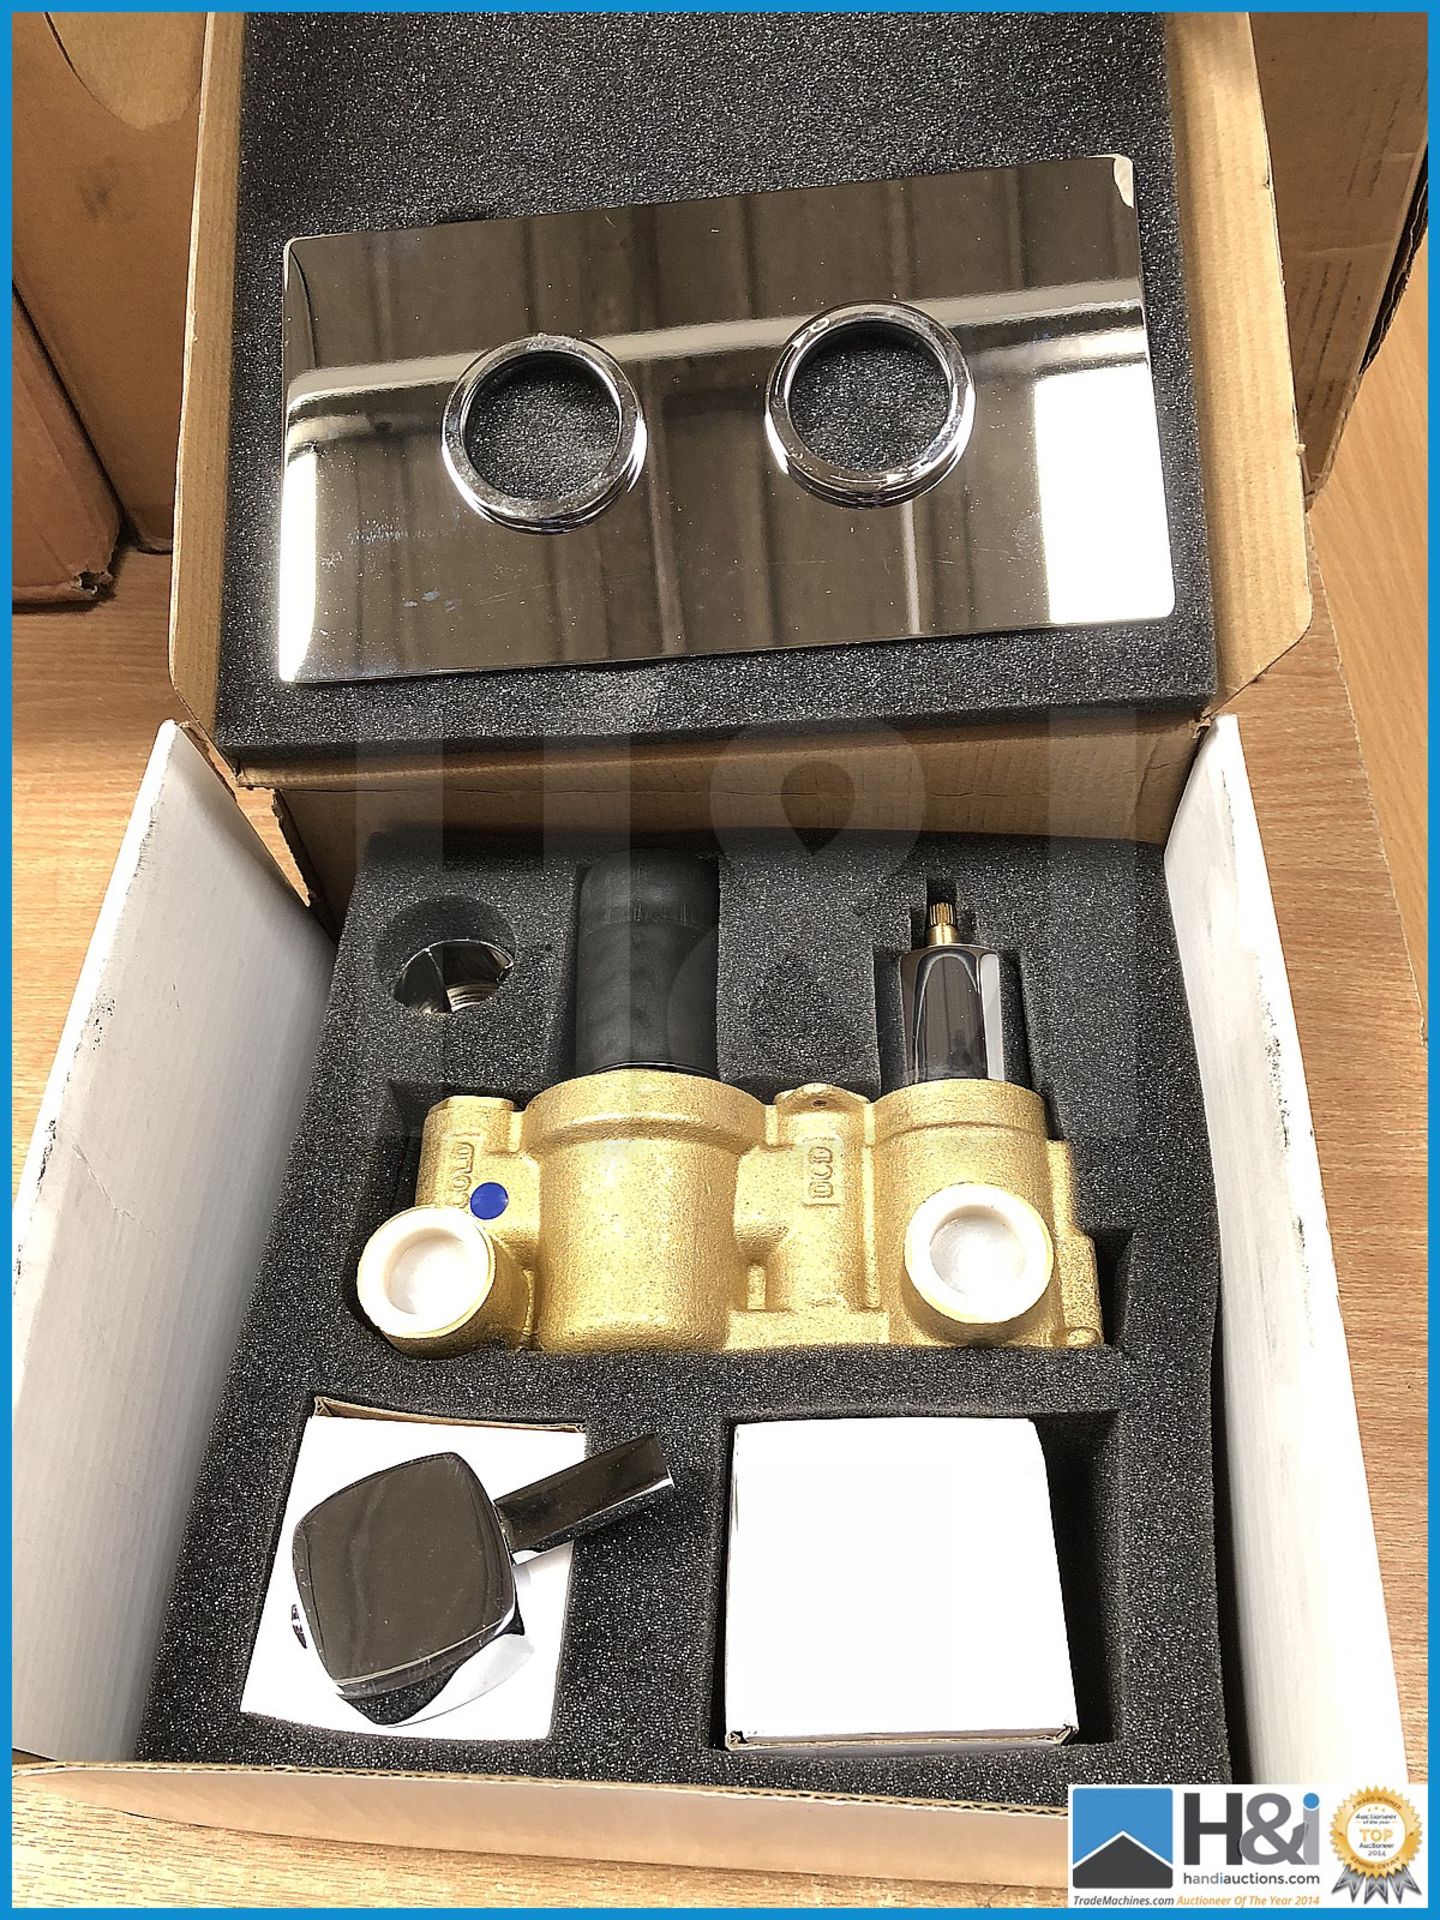 Designer Ultra MUSV52-M Muse twin valve with built in diverter .New and boxed. Suggested Manufacture